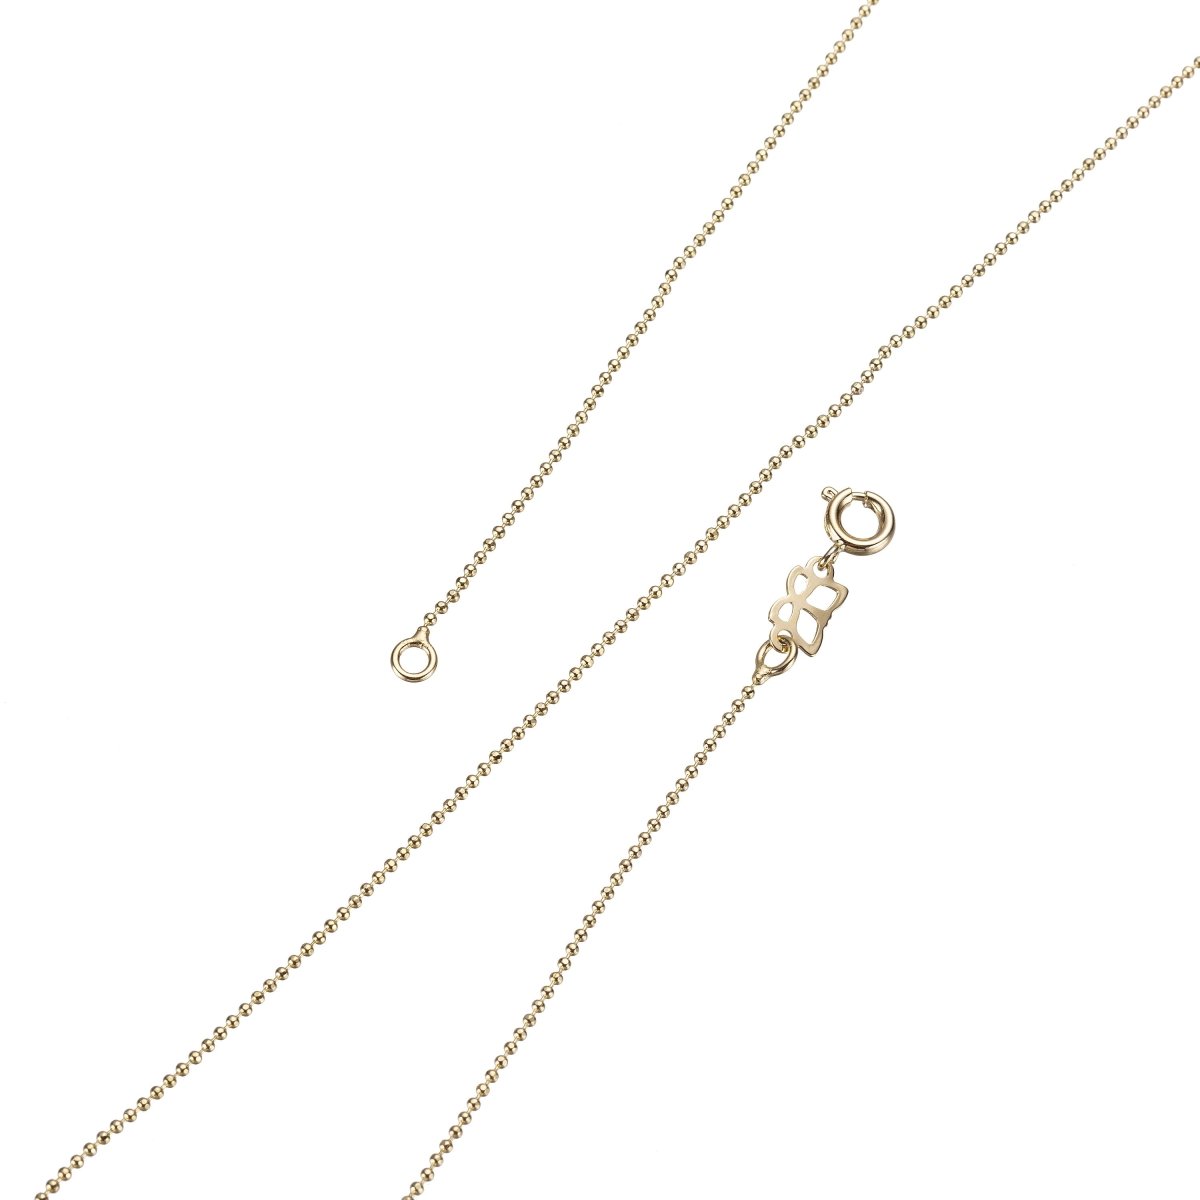 Dainty 1mm Beads Chain Necklace - 14K Gold Filled Bead Necklace - 17.75 Inches Layering Bead Necklace w/Spring Ring | CN-227 - DLUXCA